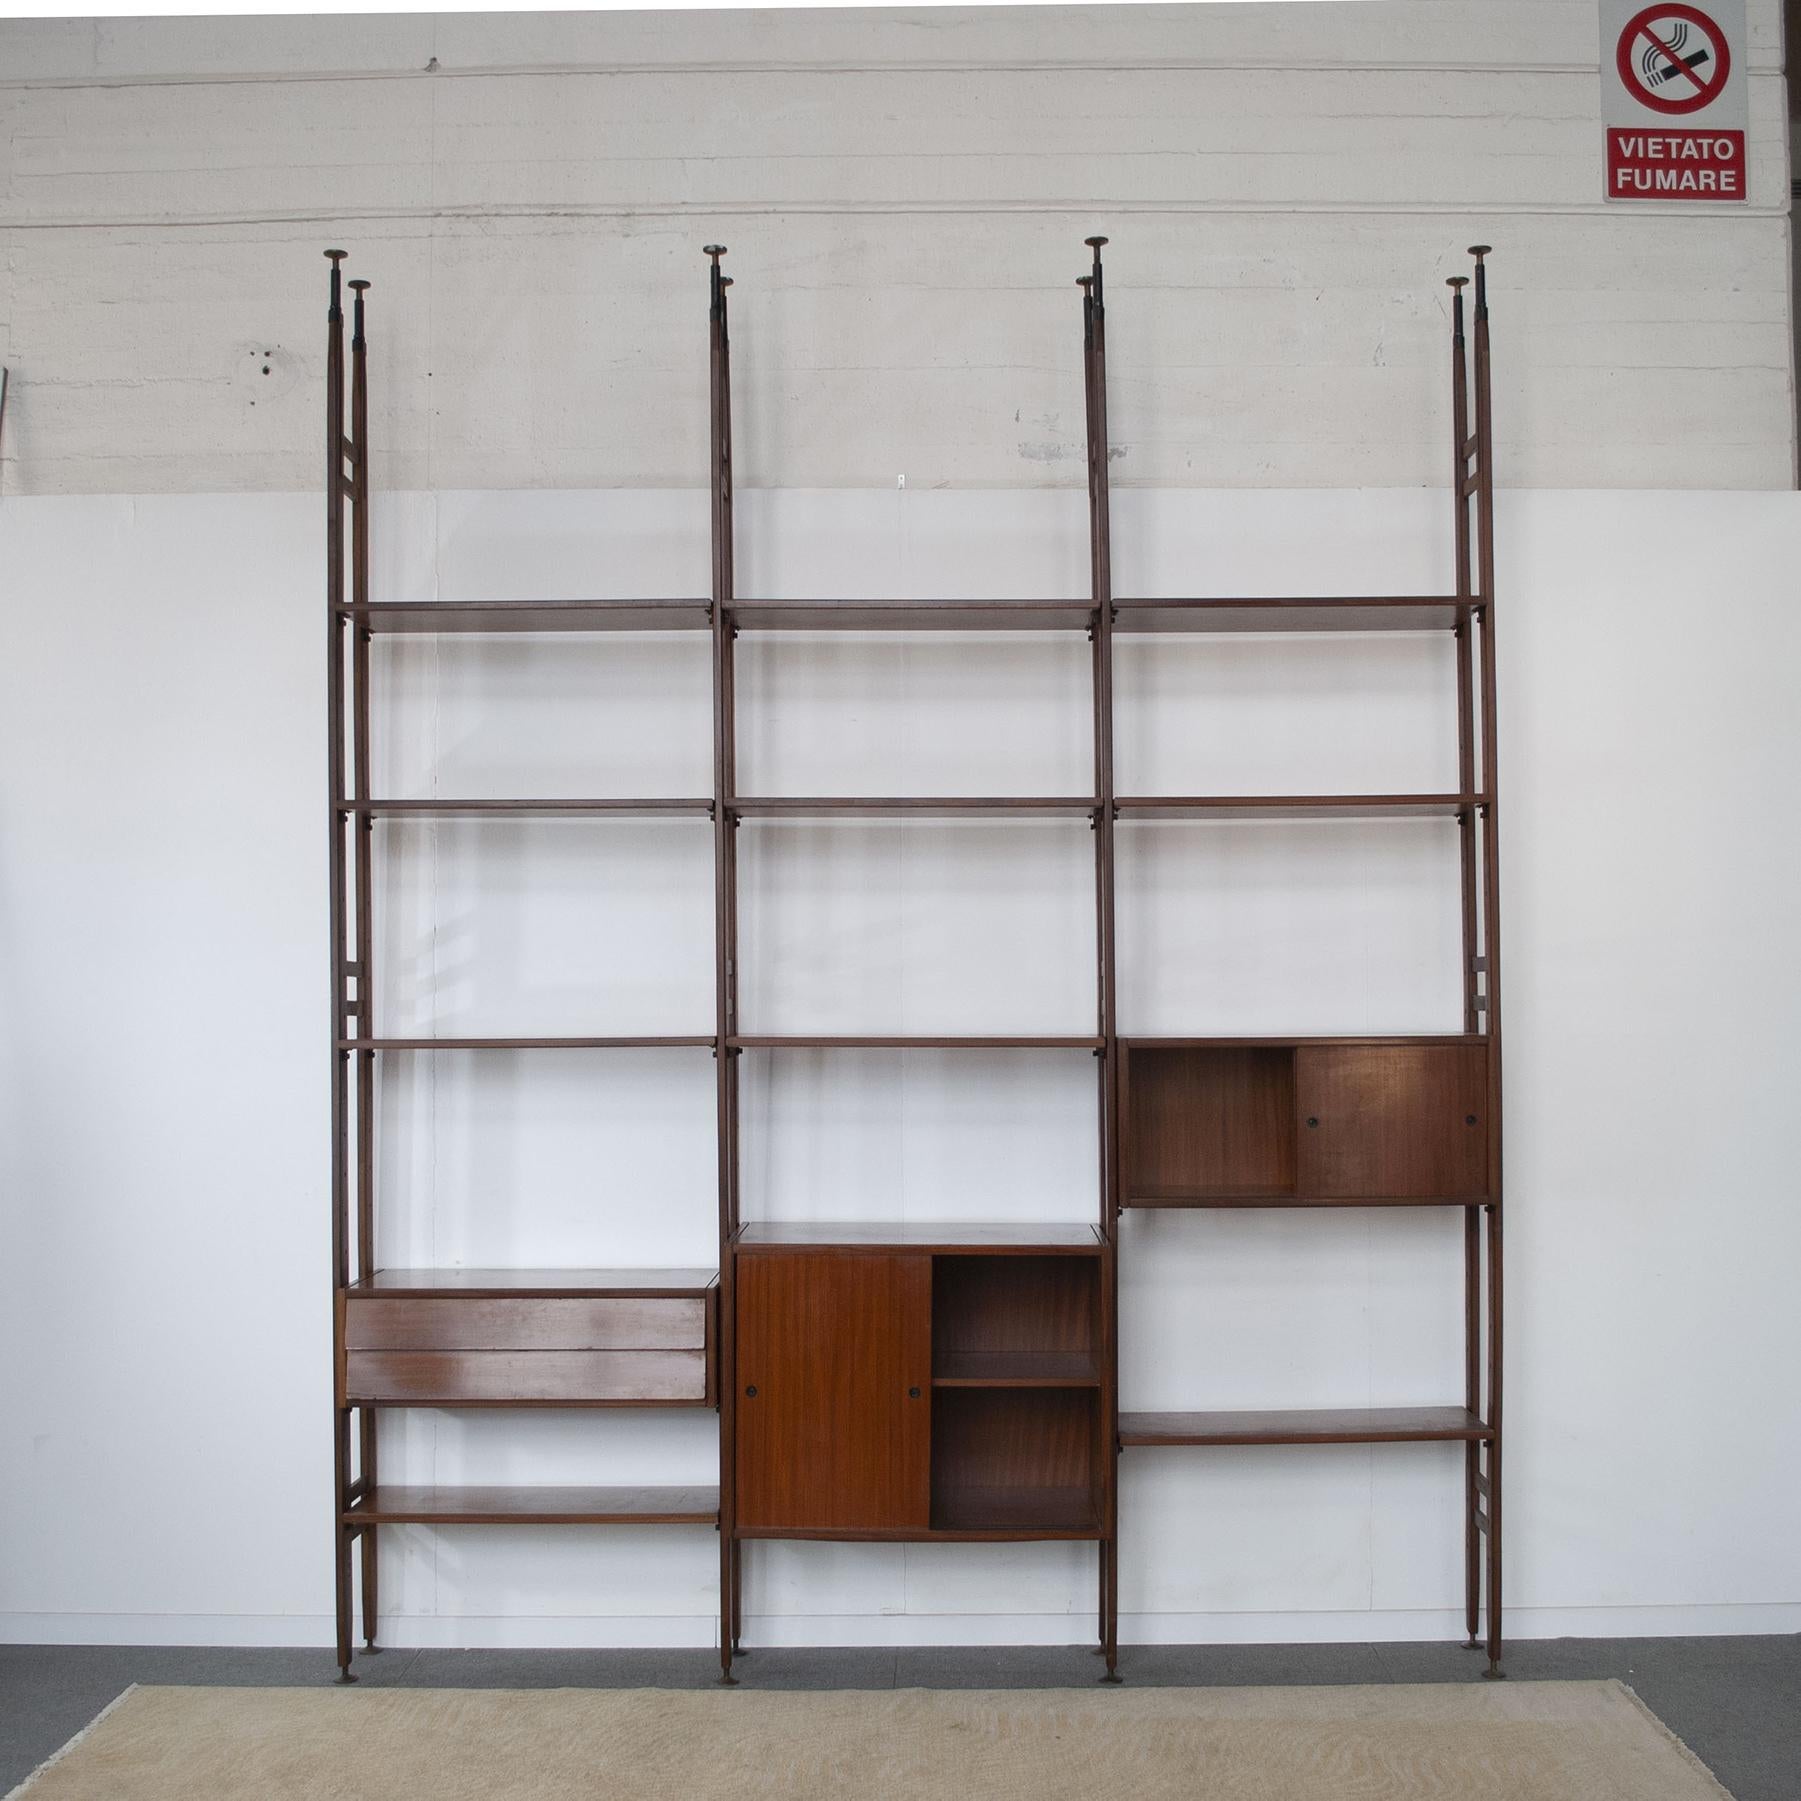 Italian Midcentury Bookcase in Wood from the Sixties 7